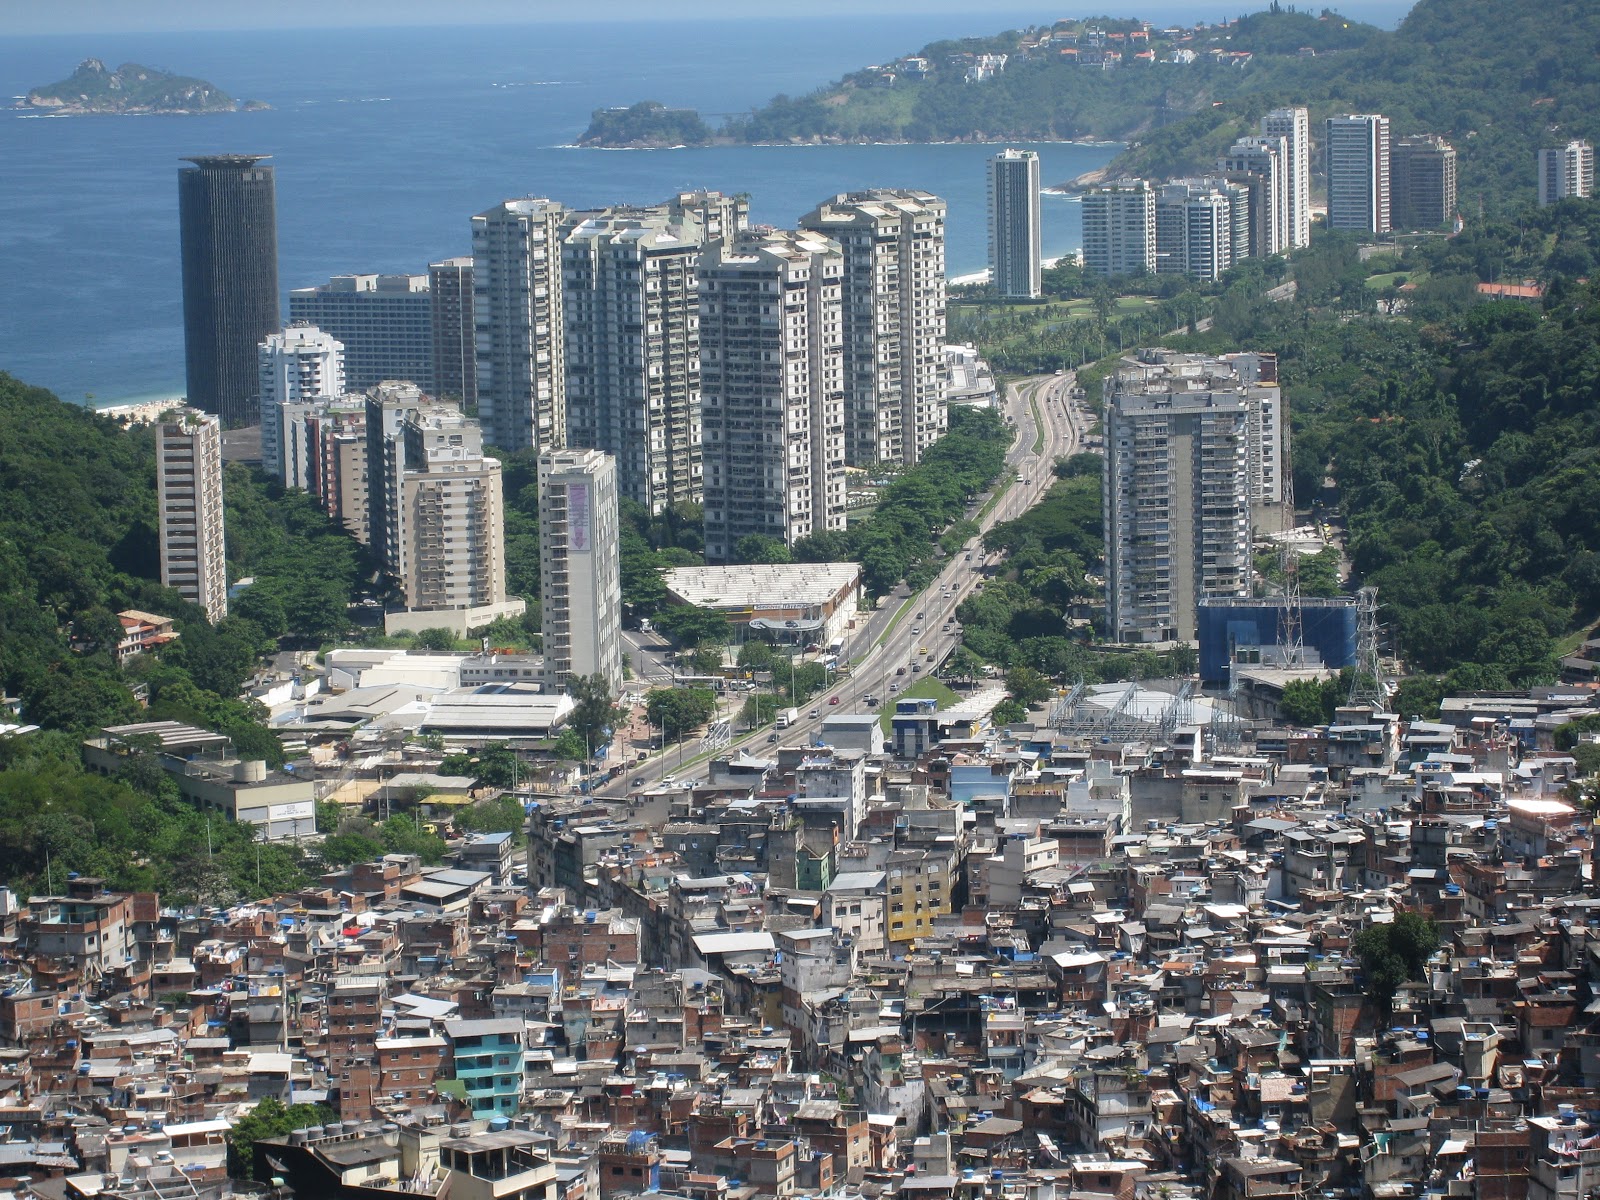 International language barriers and city design make logistics more difficult in places like Brazil. 